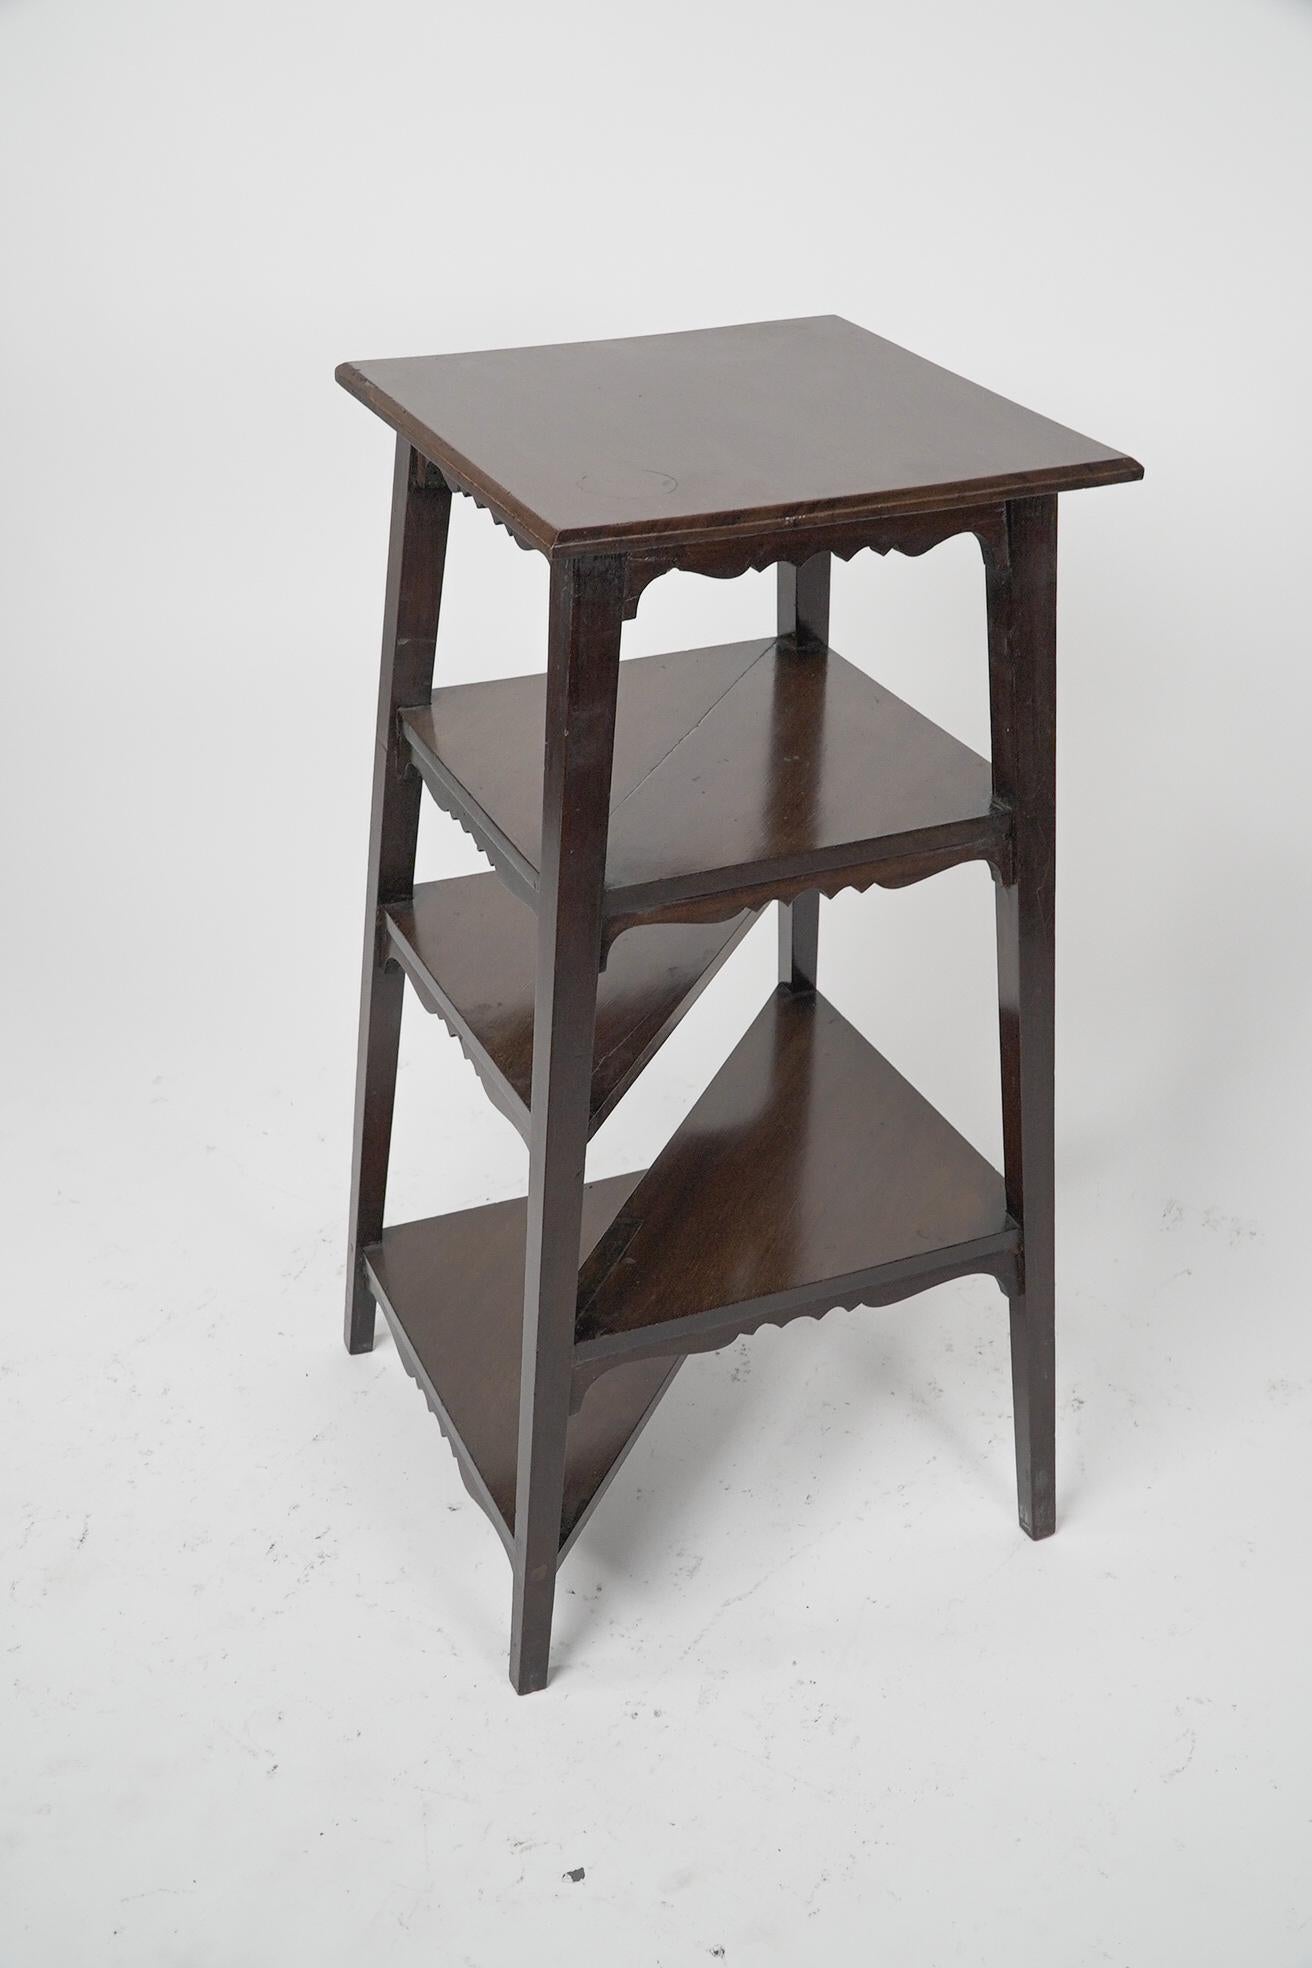 Late 19th Century Aesthetic Movement Walnut side table wot-not-stand with half triangle shelves. For Sale